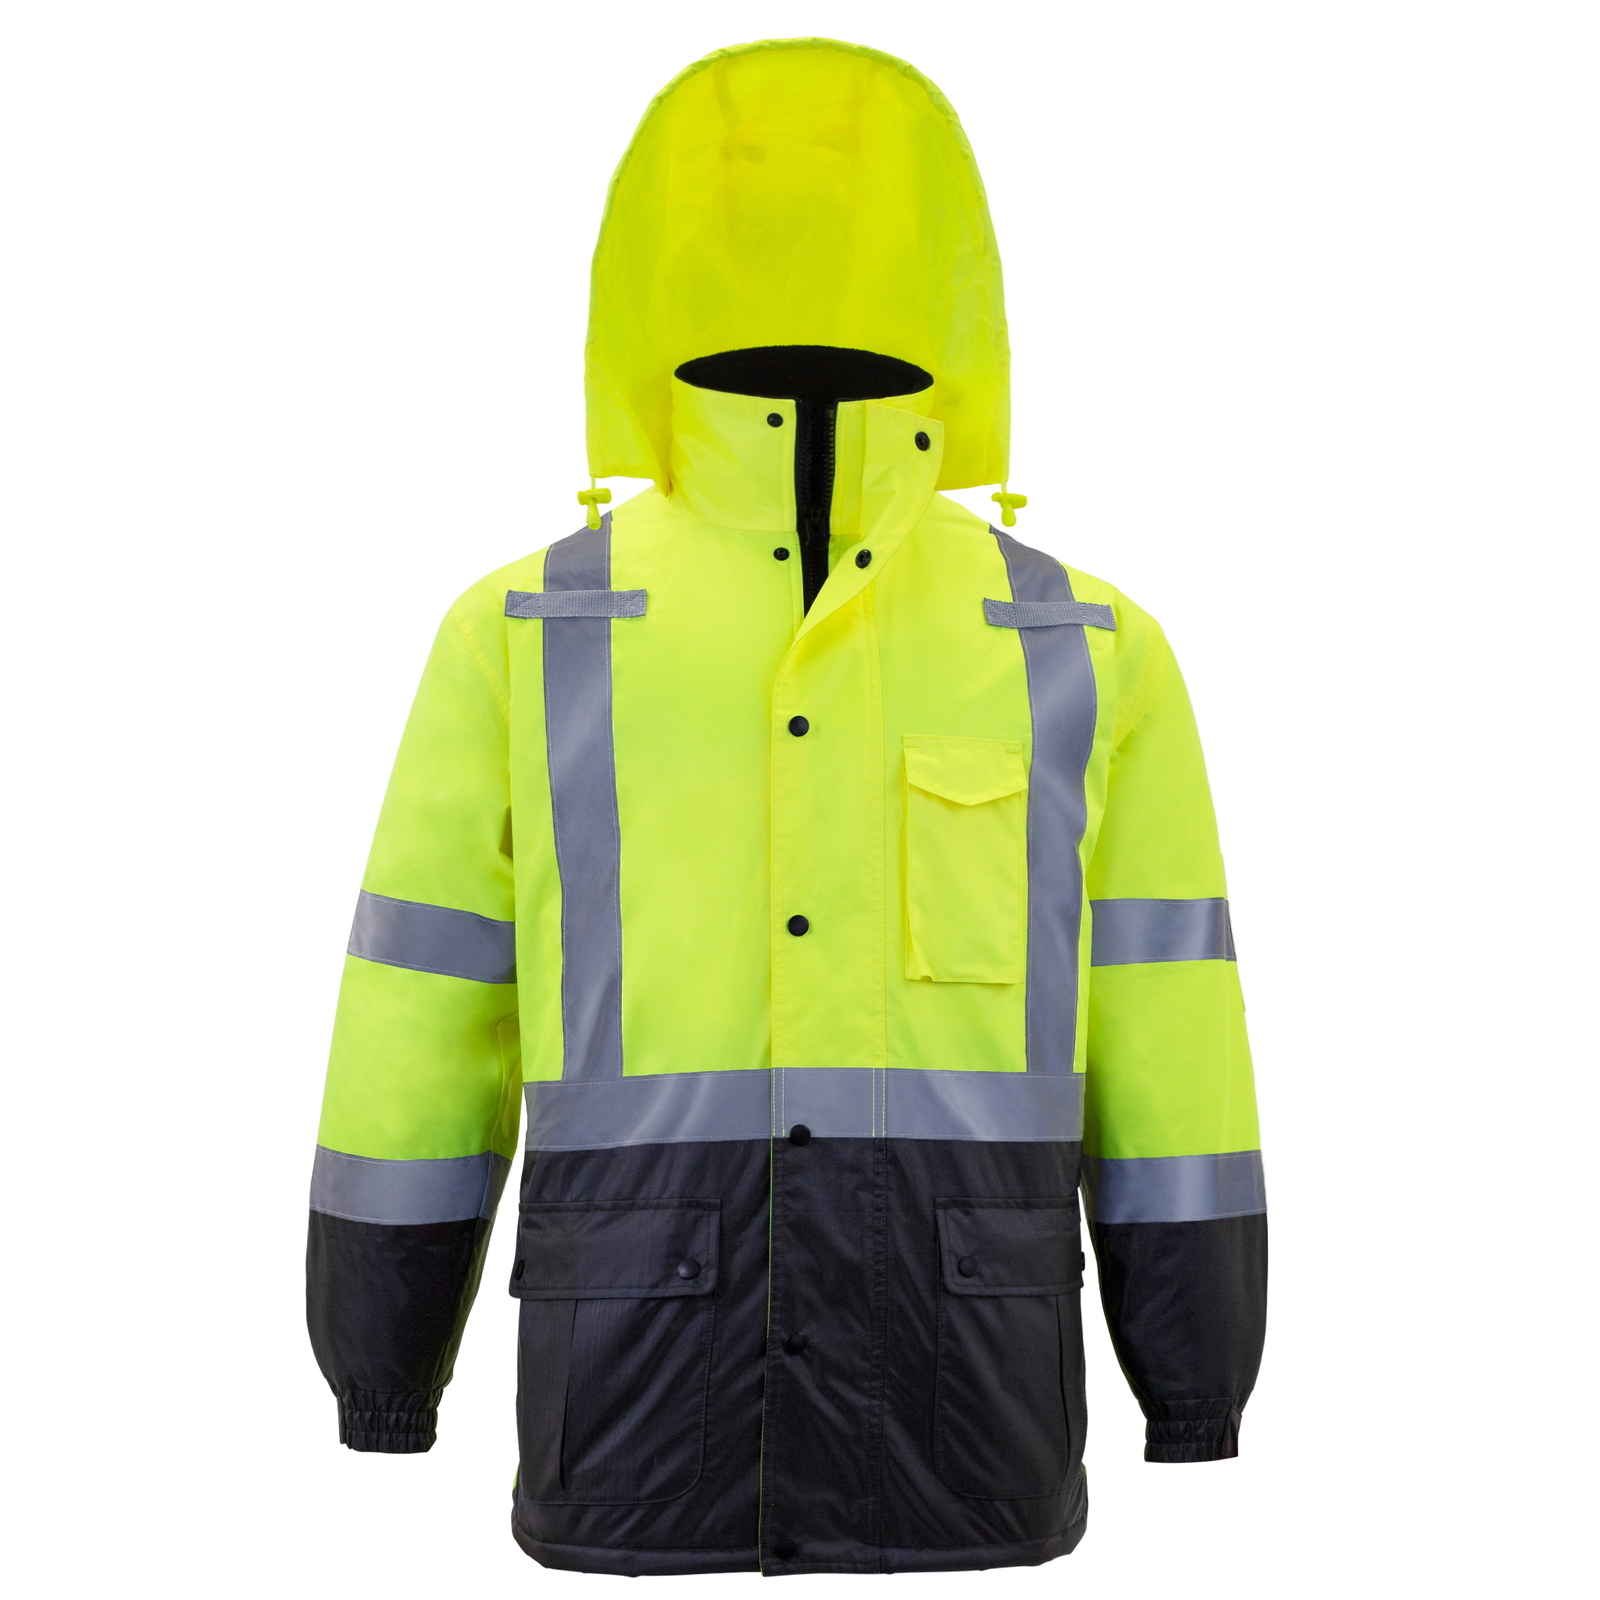 Insulated hi vis yellow parka safety jacket with reflective stripes and hide away adjustable hoodie